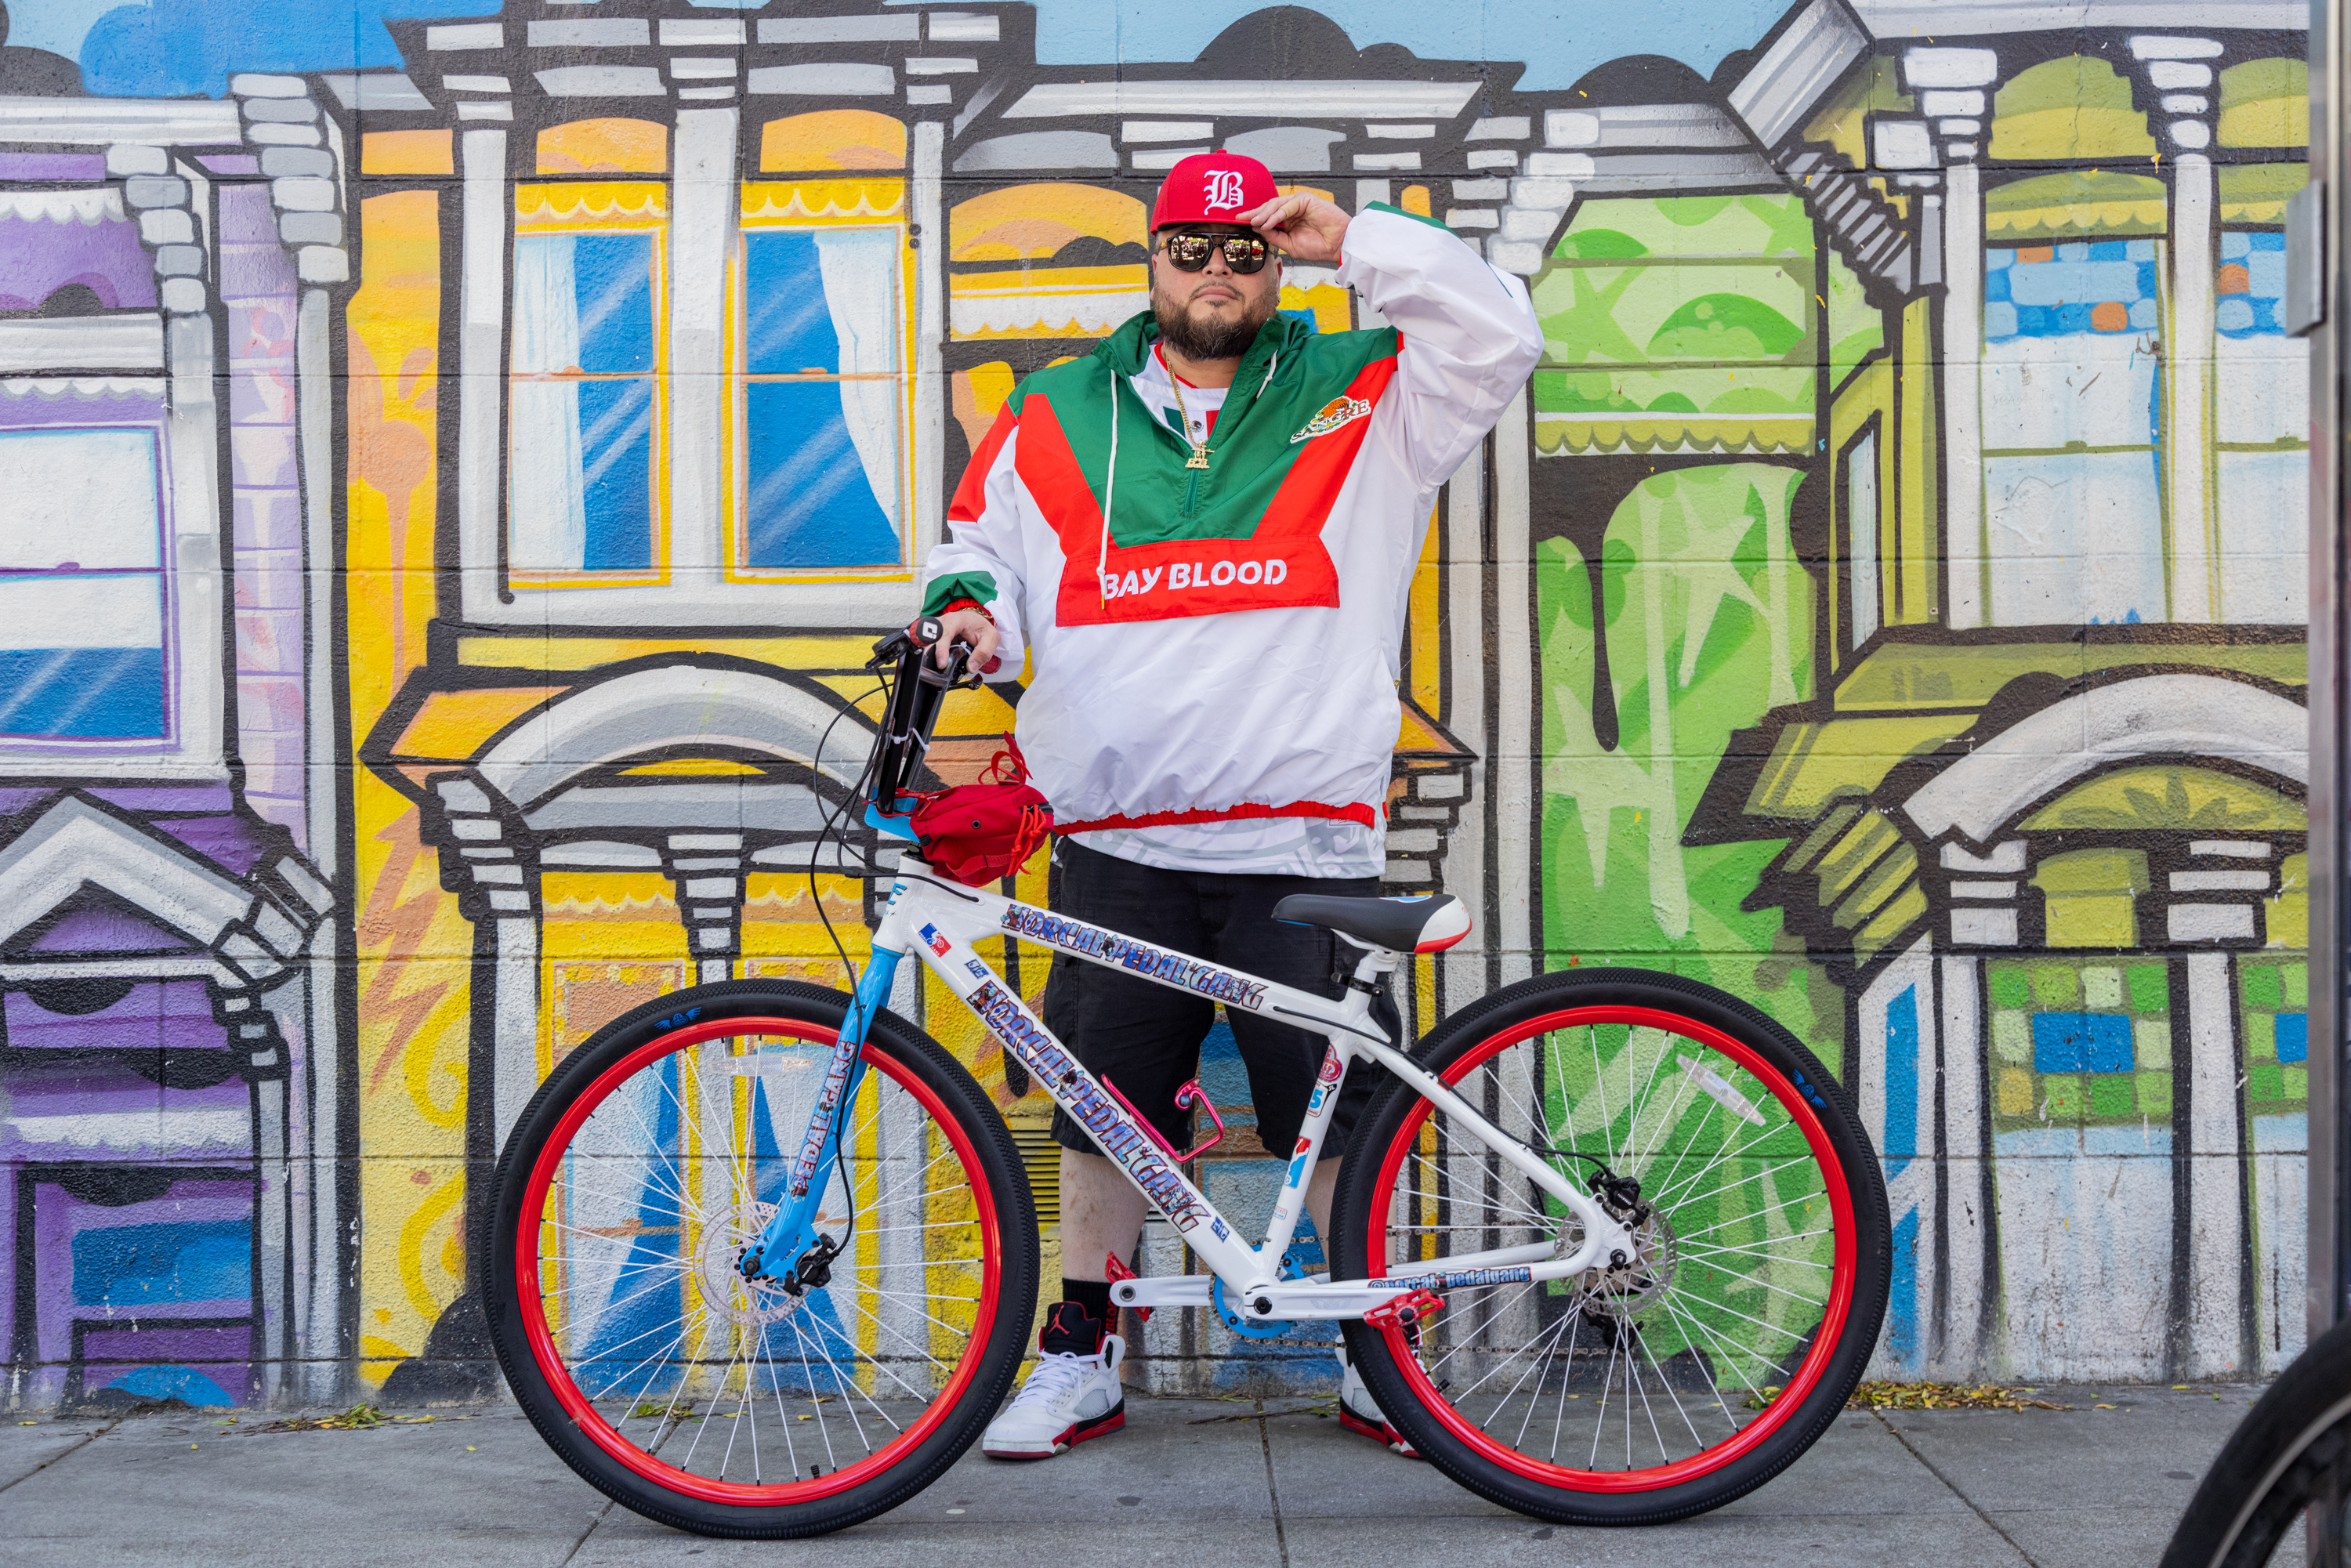 A man stands with a bike before a colorful mural dressed in sporty attire, exuding a cool urban vibe.